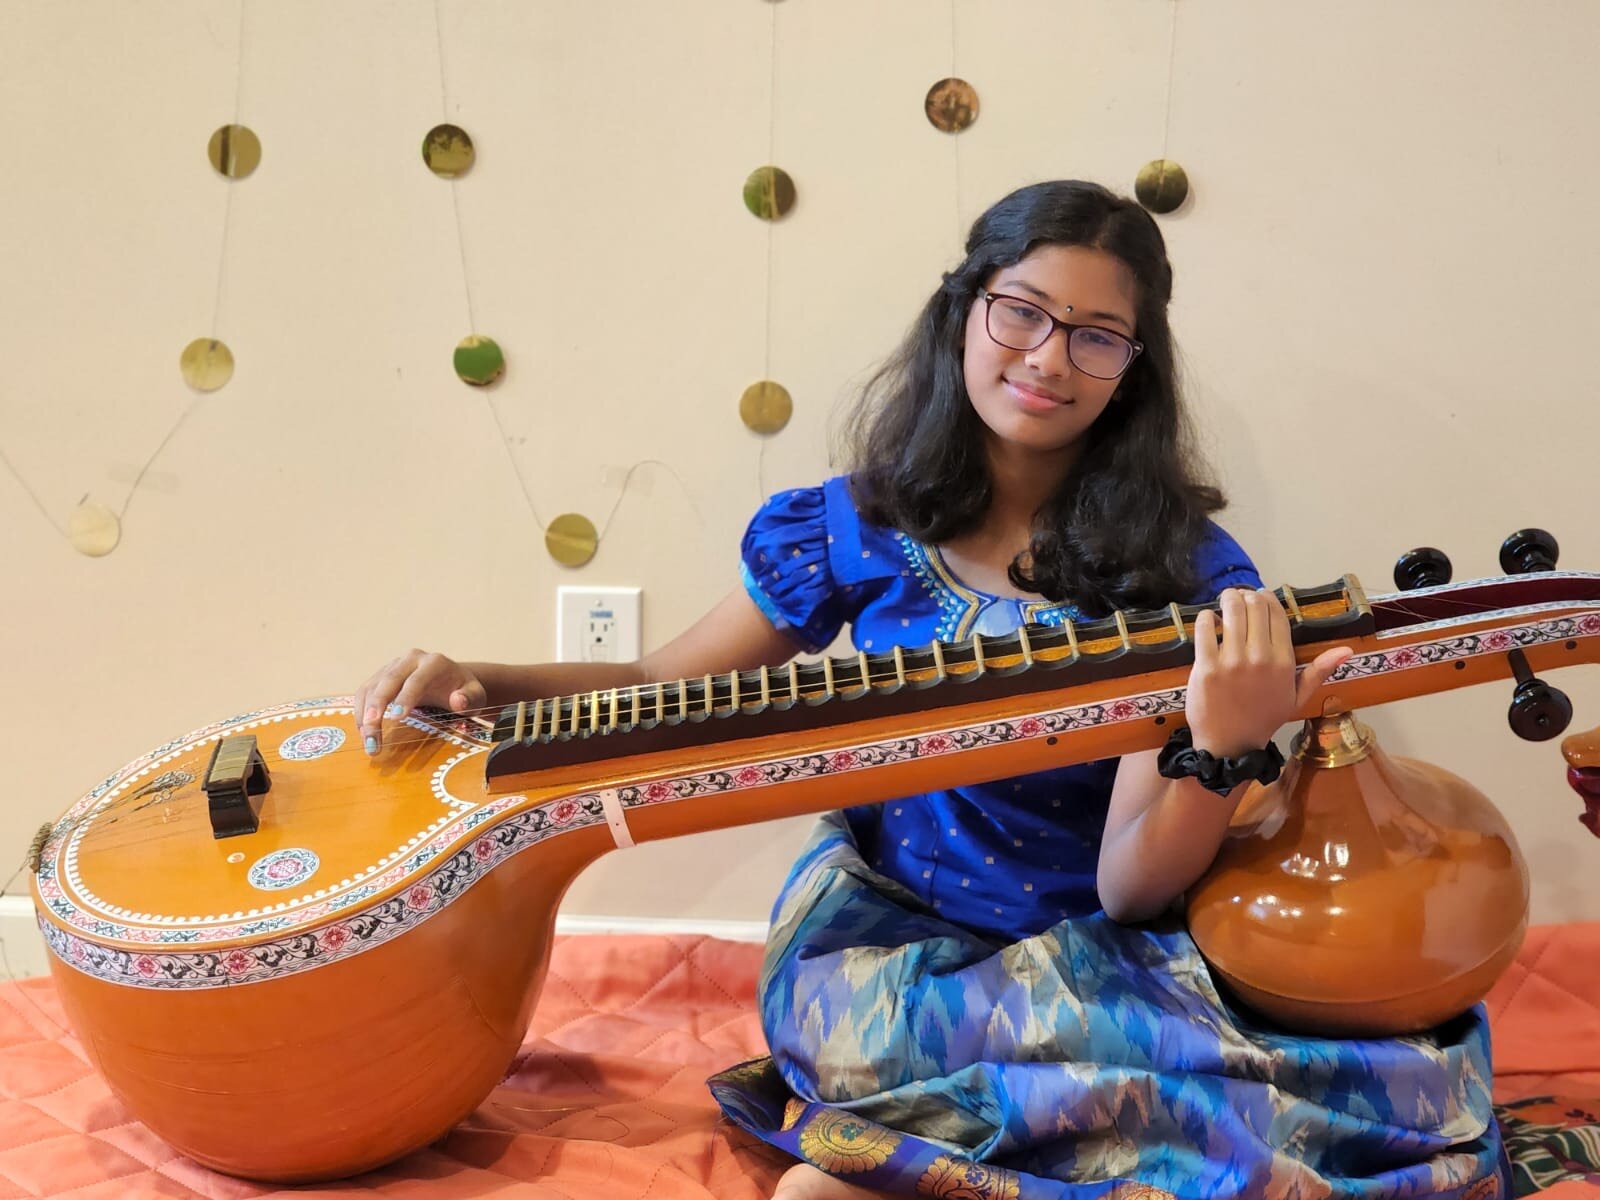 Sai Santhosh plays the Veena, a ancient Indian string instrument.